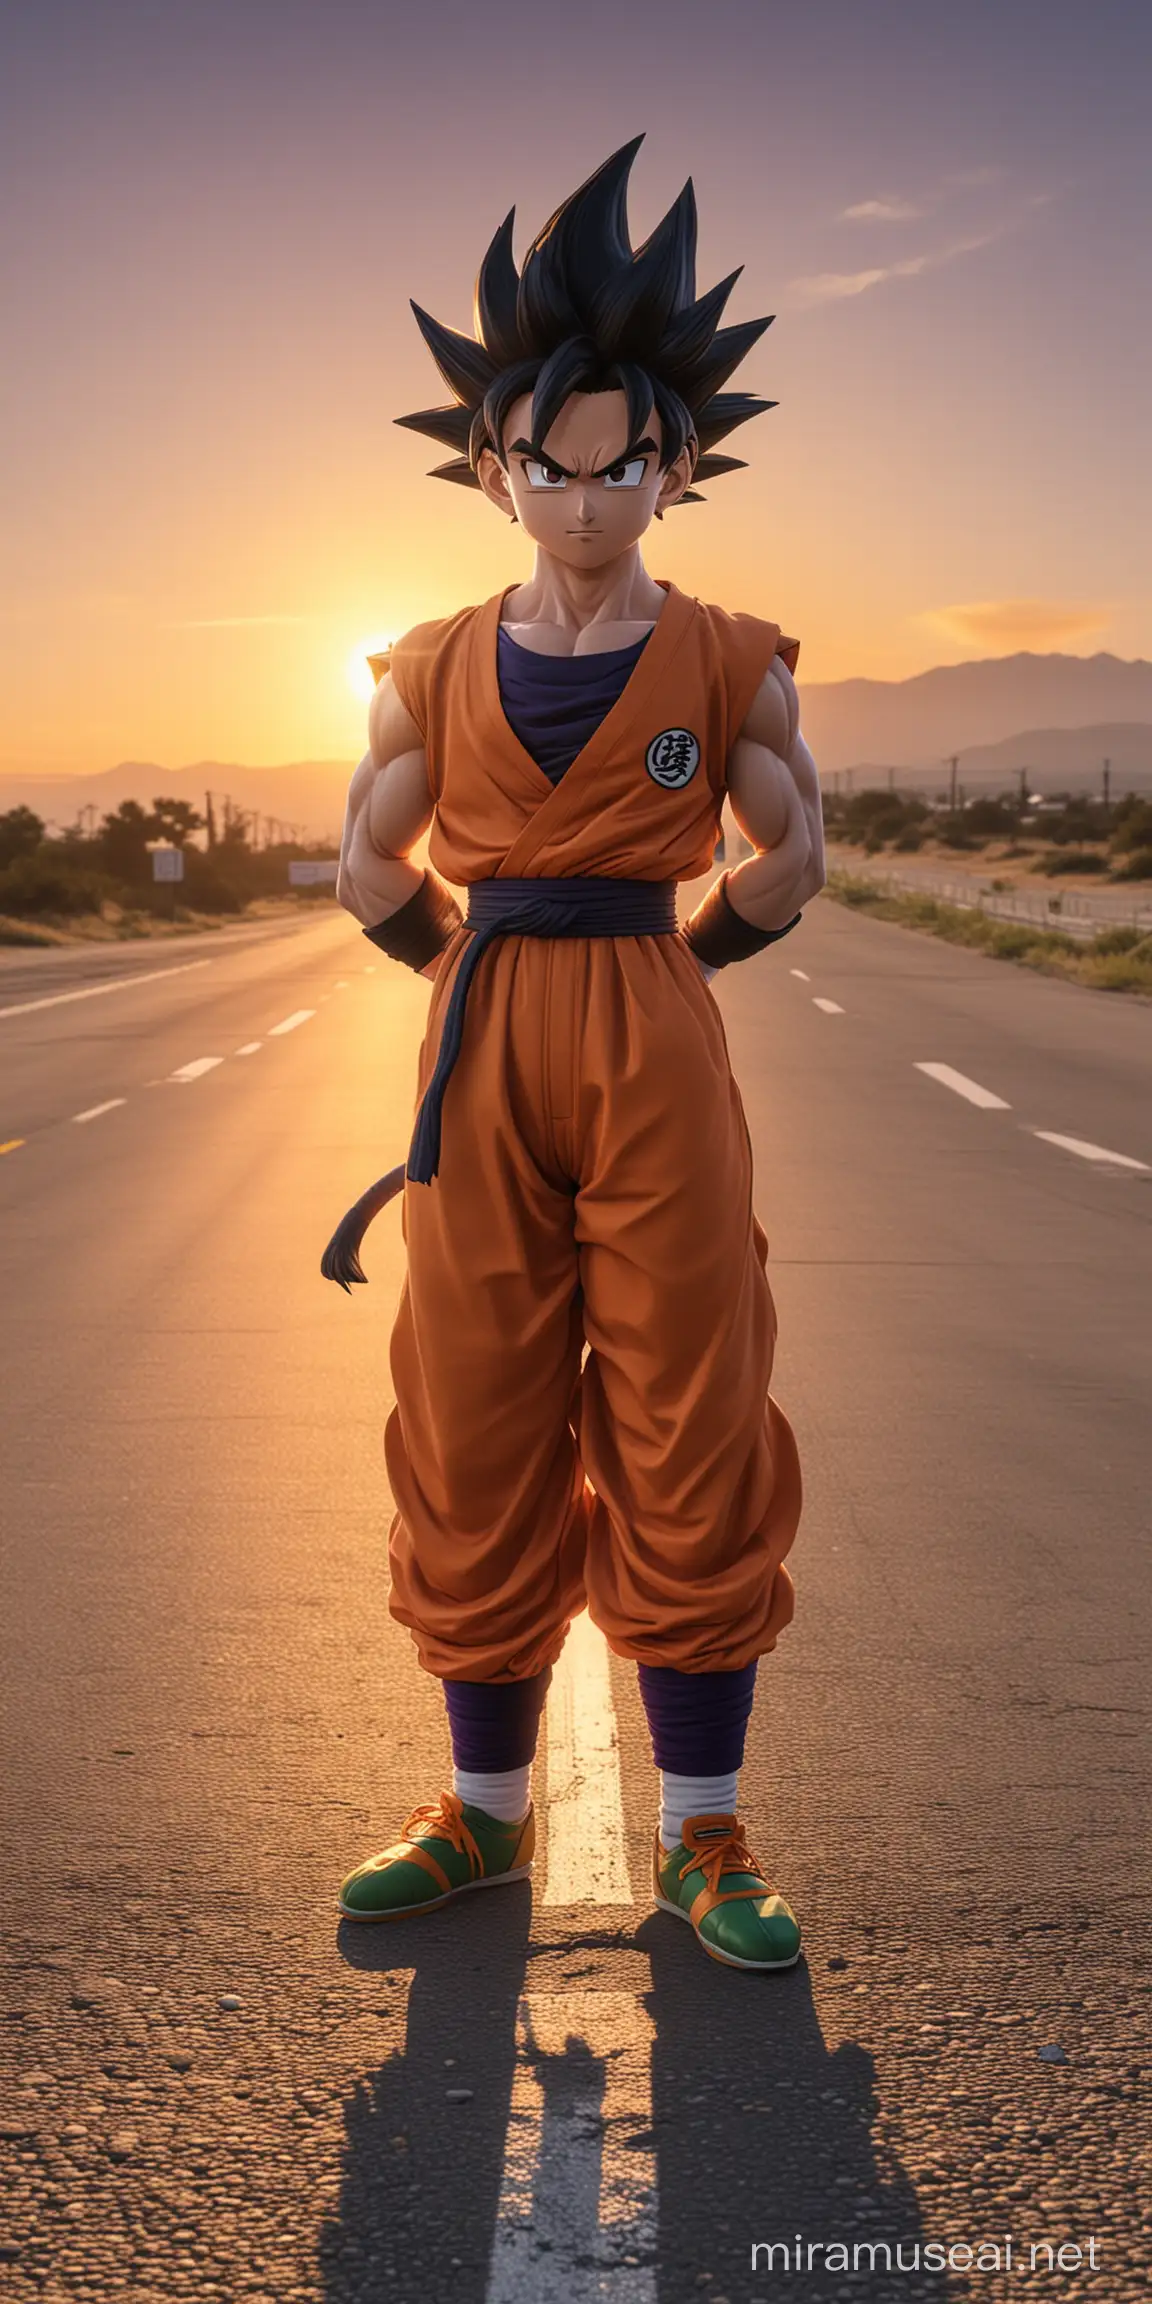 Gohan dragon ballz stand on the road with clear sunset background